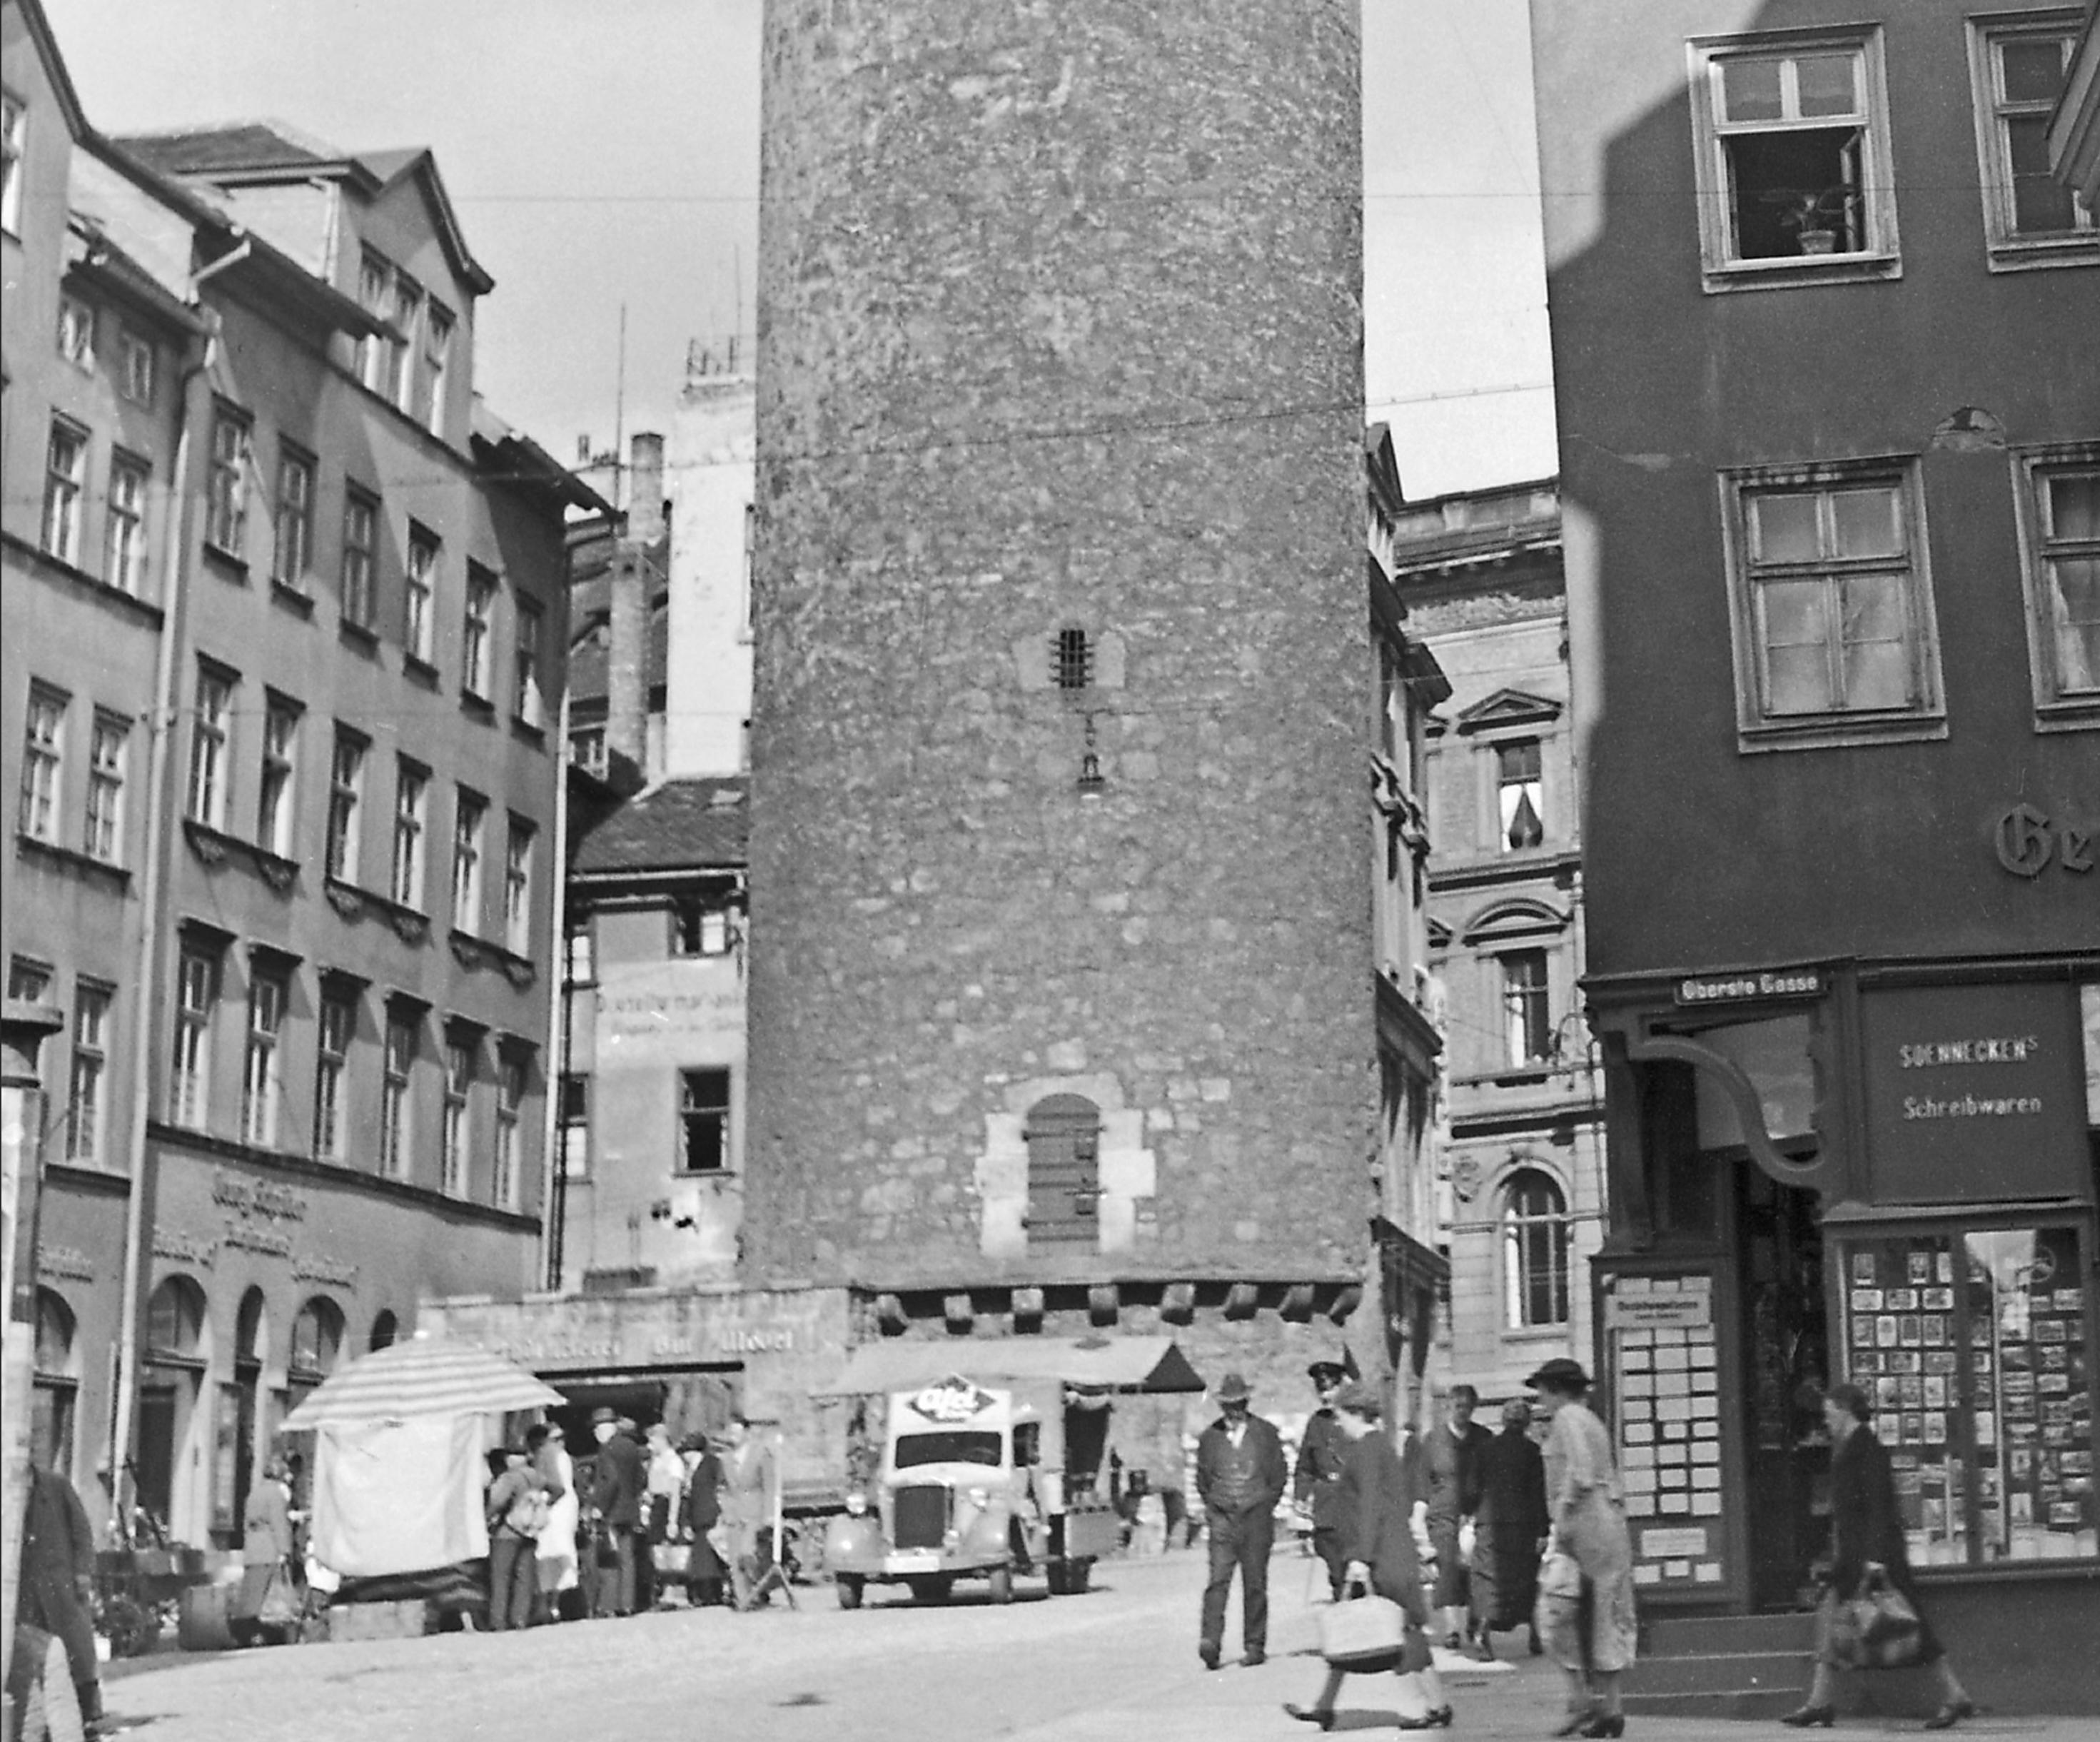 Druselturm tower at the old city of Kassel, Germany 1937 Printed Later  - Photograph by Karl Heinrich Lämmel